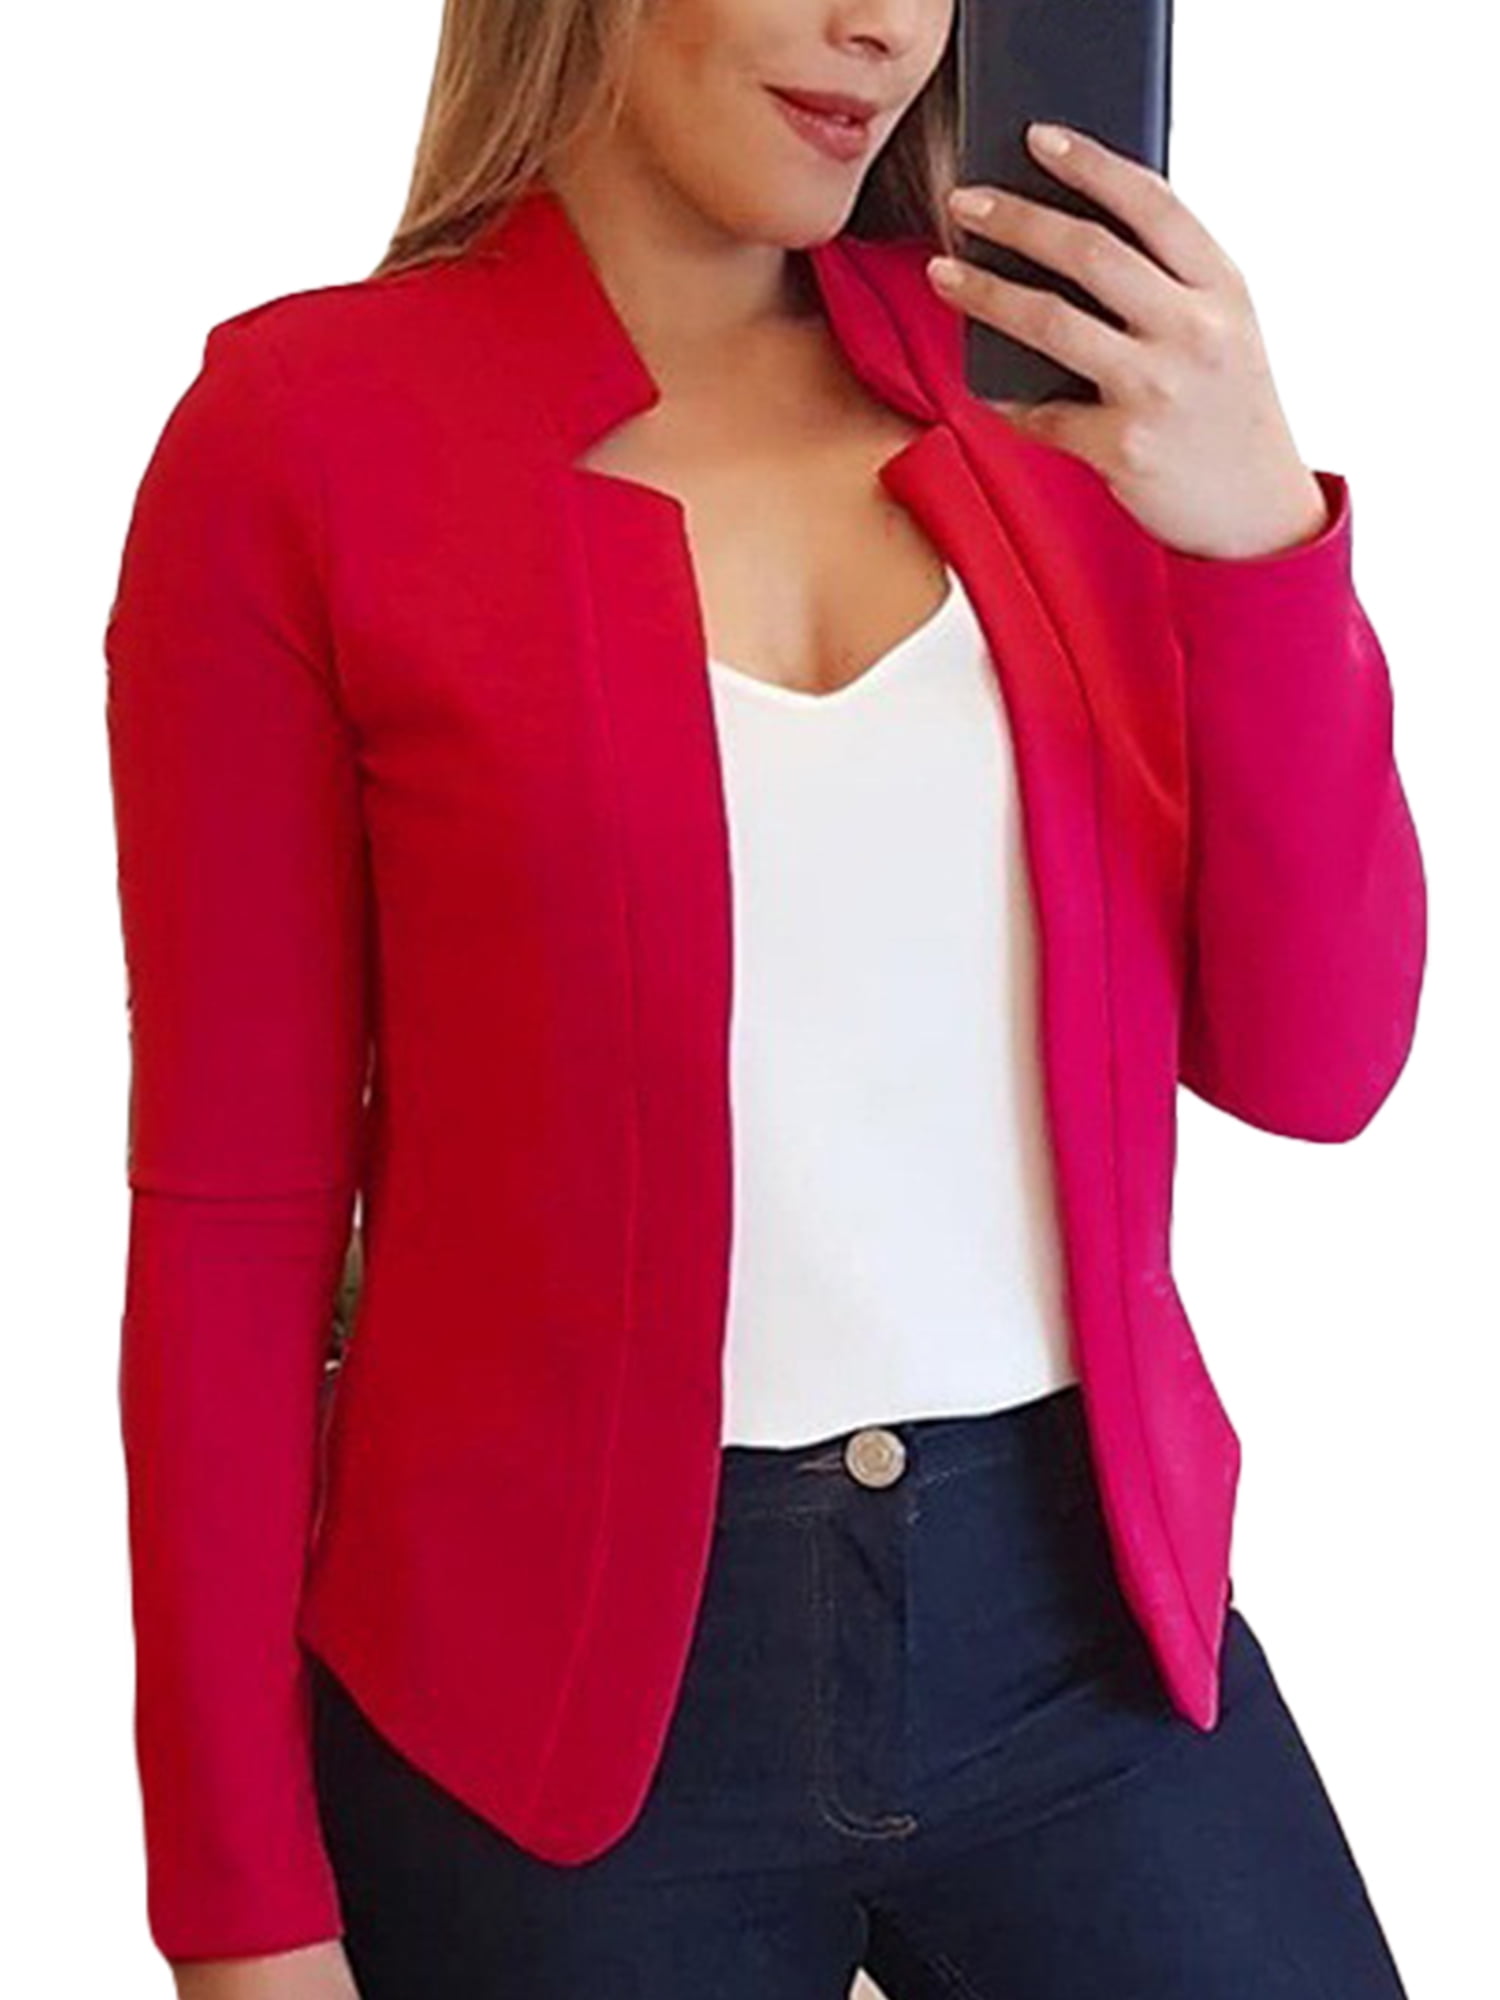 Women's Open Front Long Sleeves Casual Work Blazer Jacket Cardigan with Plus Size Suit 